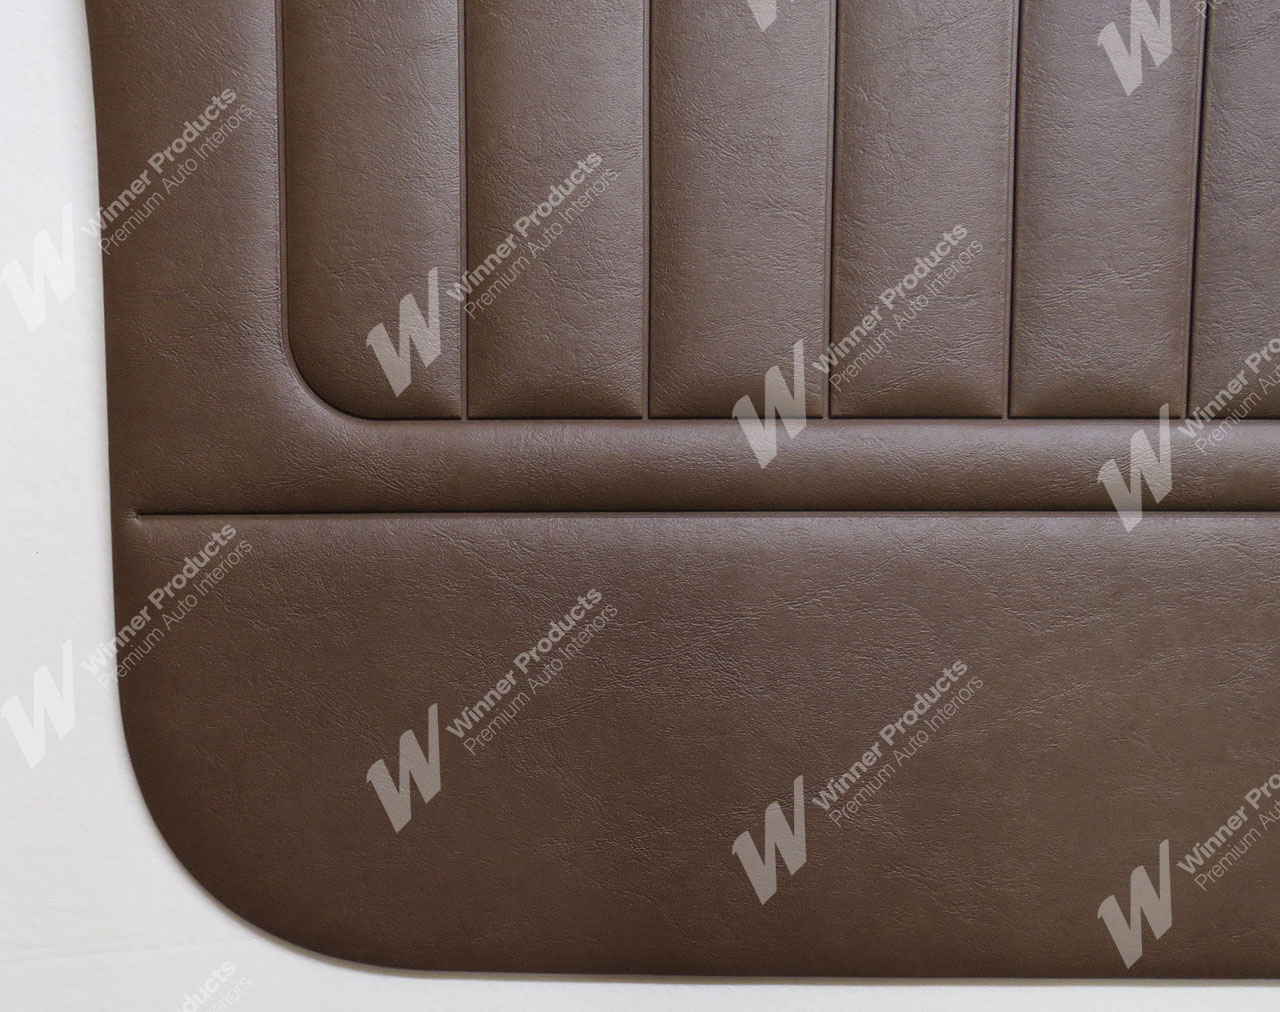 Holden Kingswood WB Kingswood Ute 66X Oyster & Cloth Door Trims (Image 3 of 3)